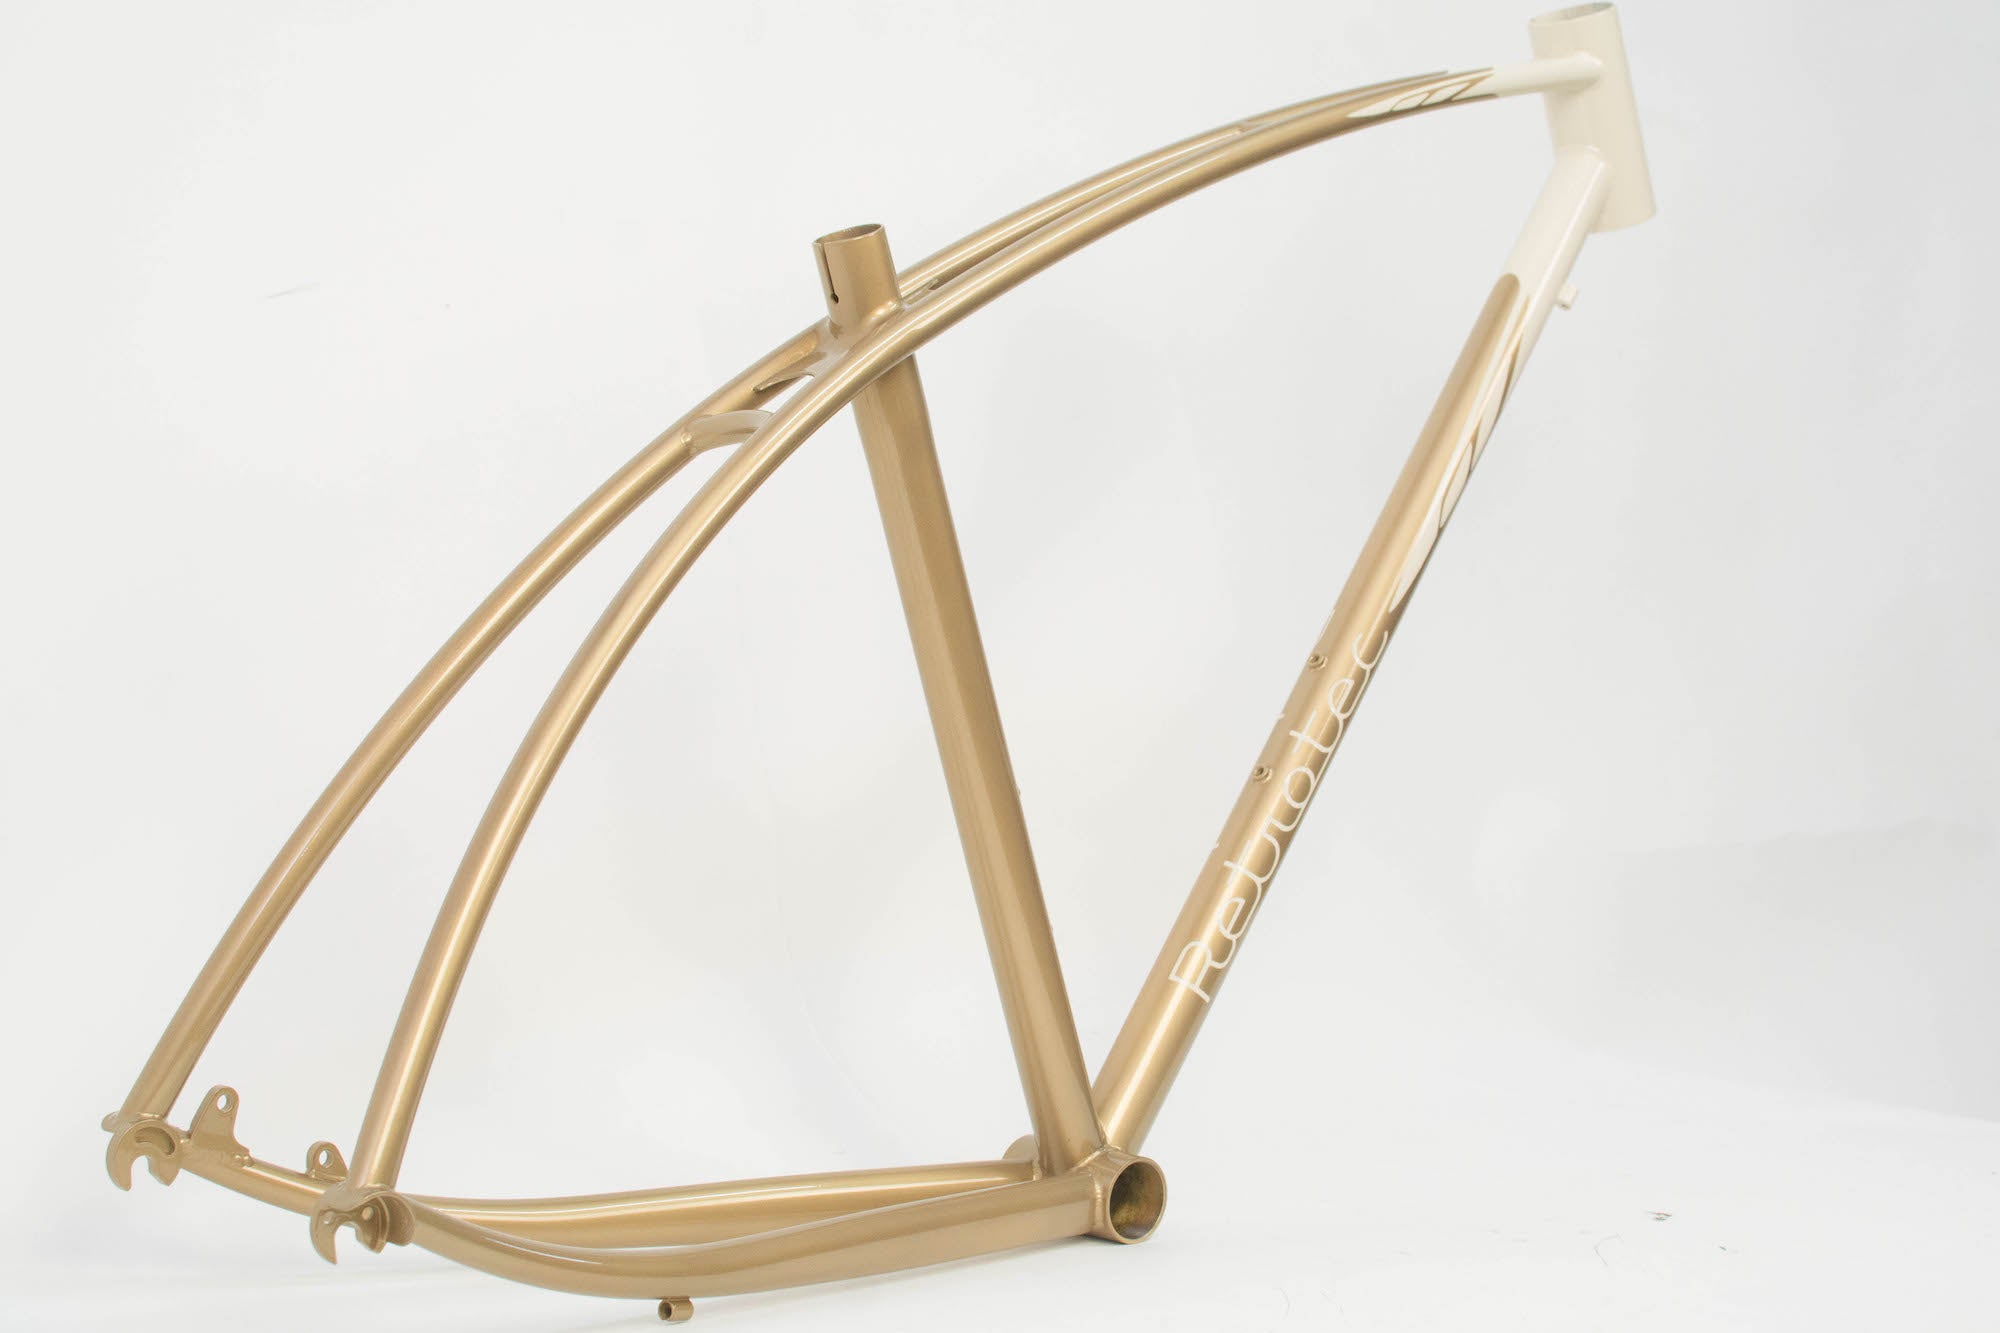 RETROTEC Twin-Top Disc CX / Oyster&Gold 54